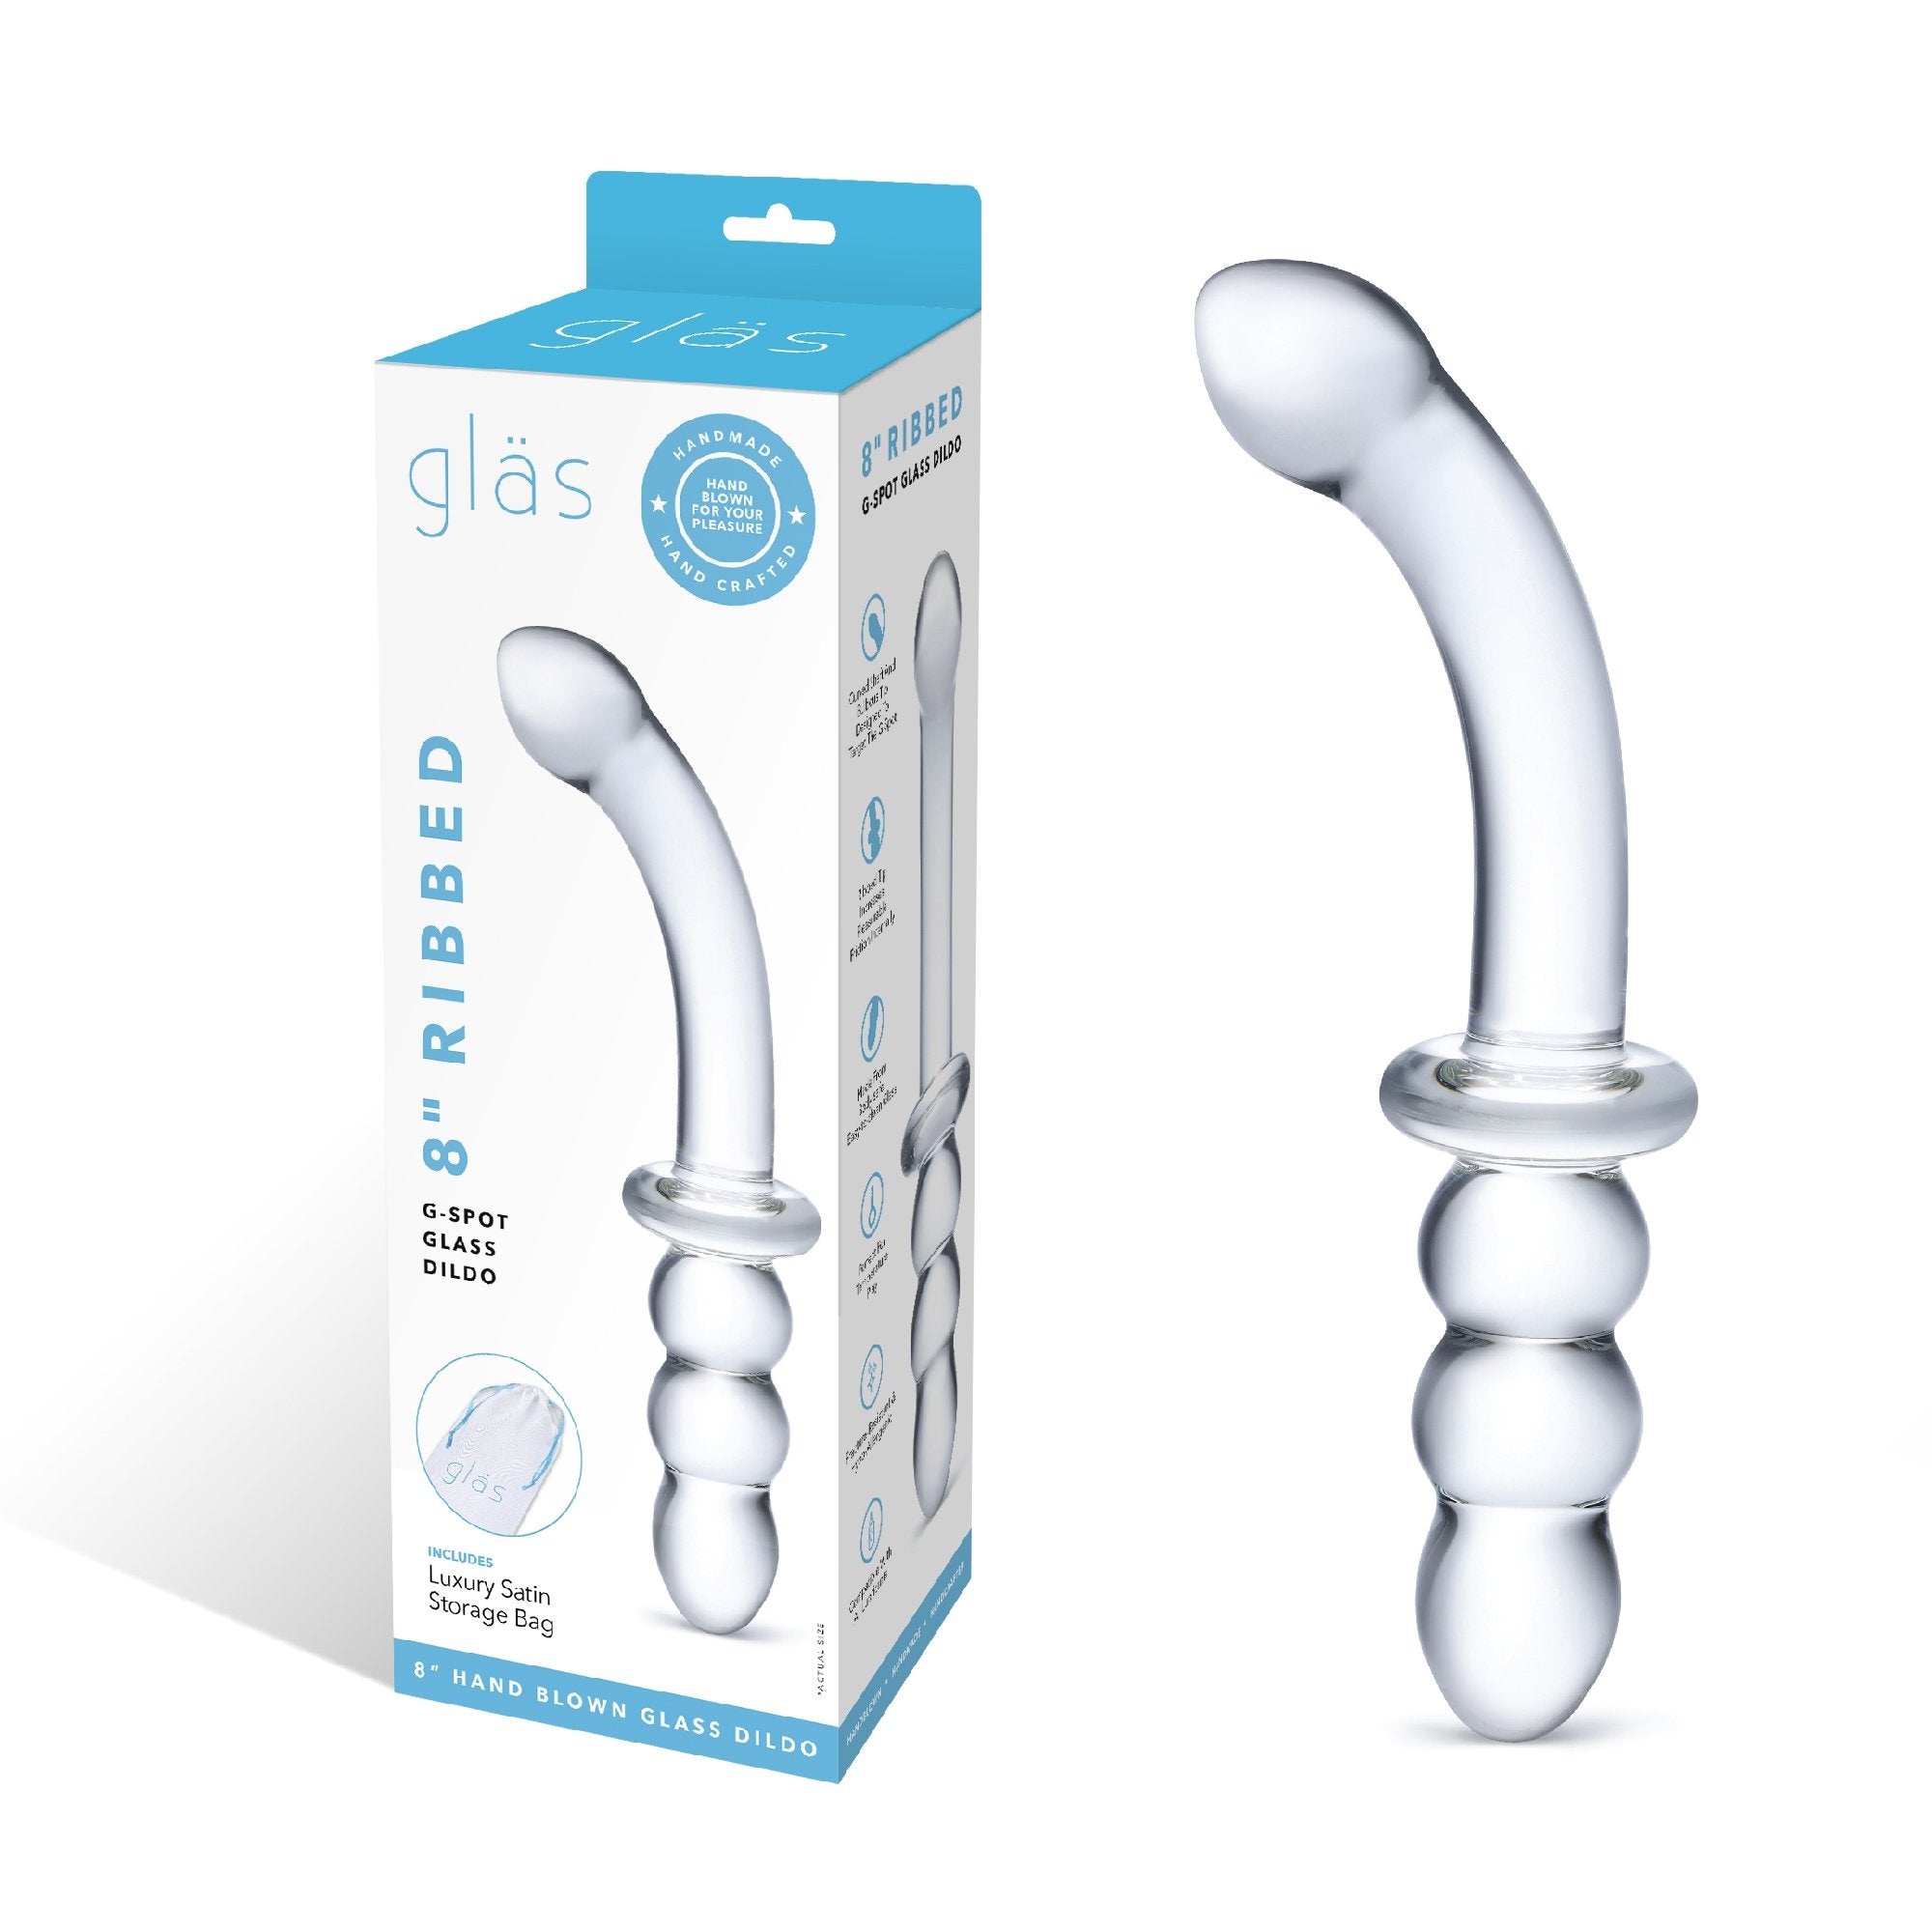 Packaging of the Gläs 8 inch Ribbed G-Spot Glass Dildo